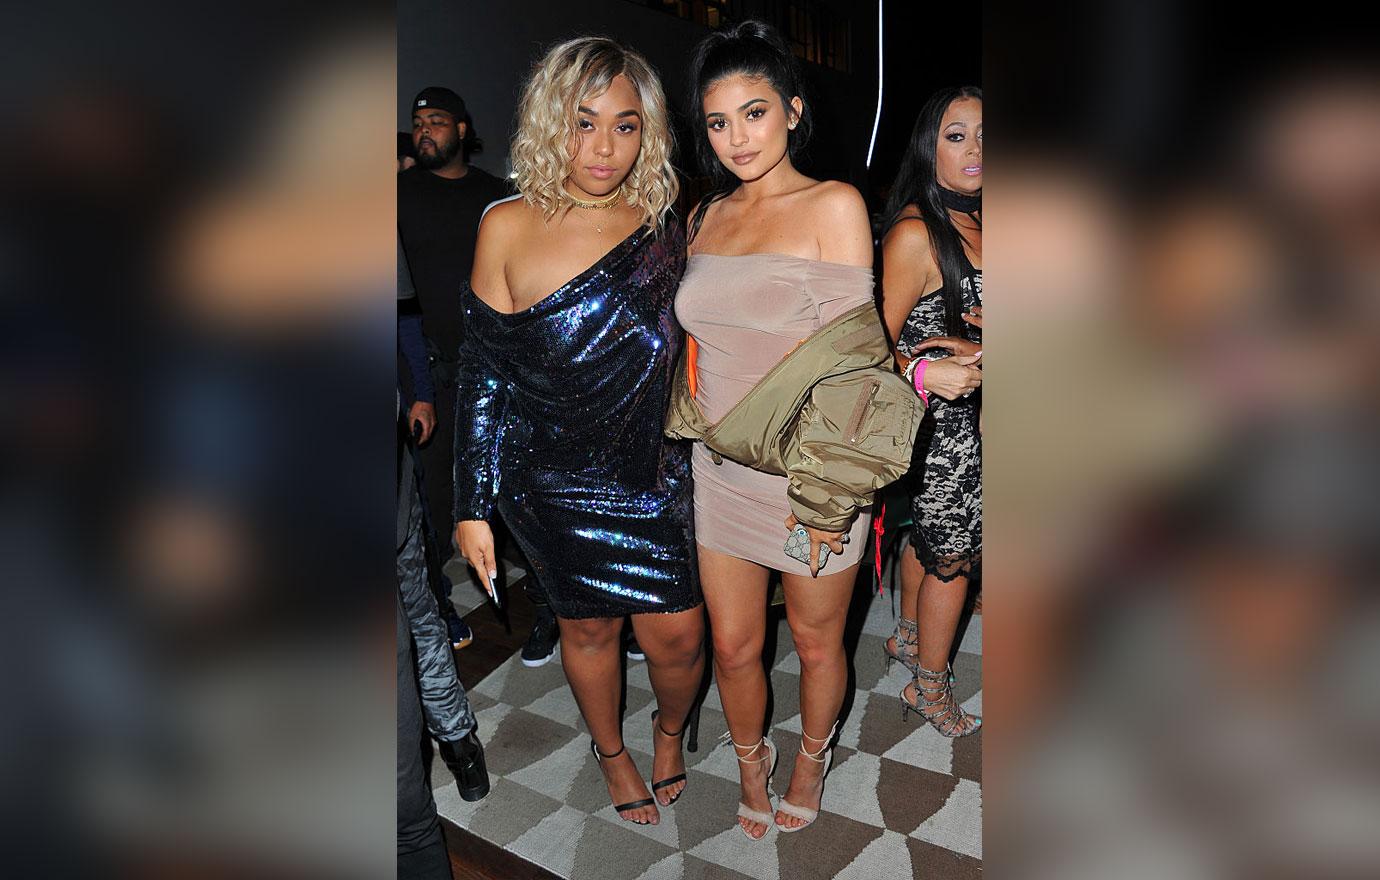 Kylie Jenner finding it 'difficult' to cut off Jordyn Woods after cheating  scandal